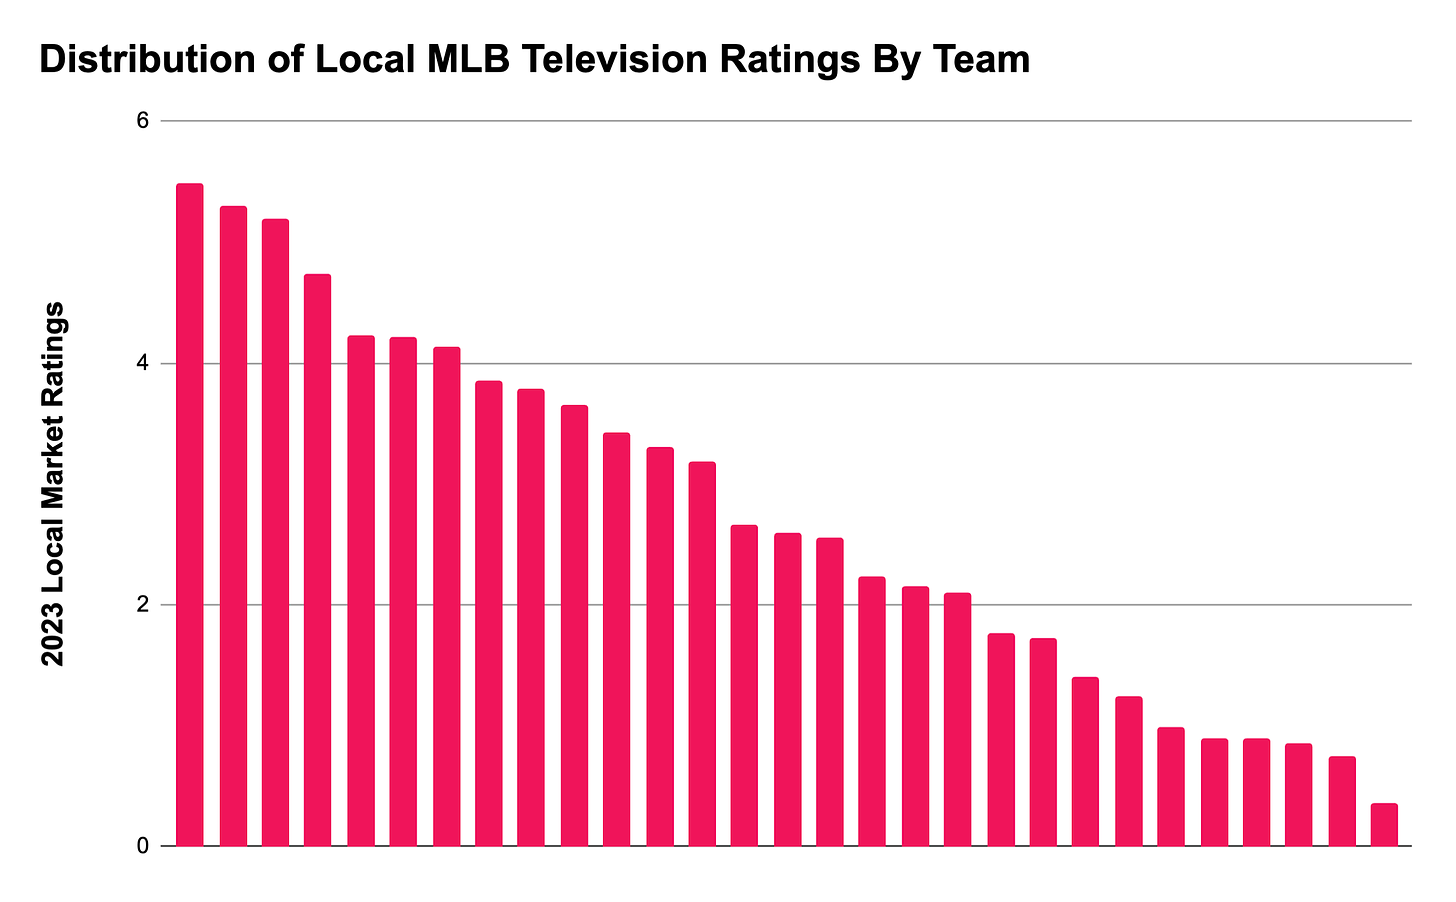 Distribution of Local MLB Television Ratings by Team